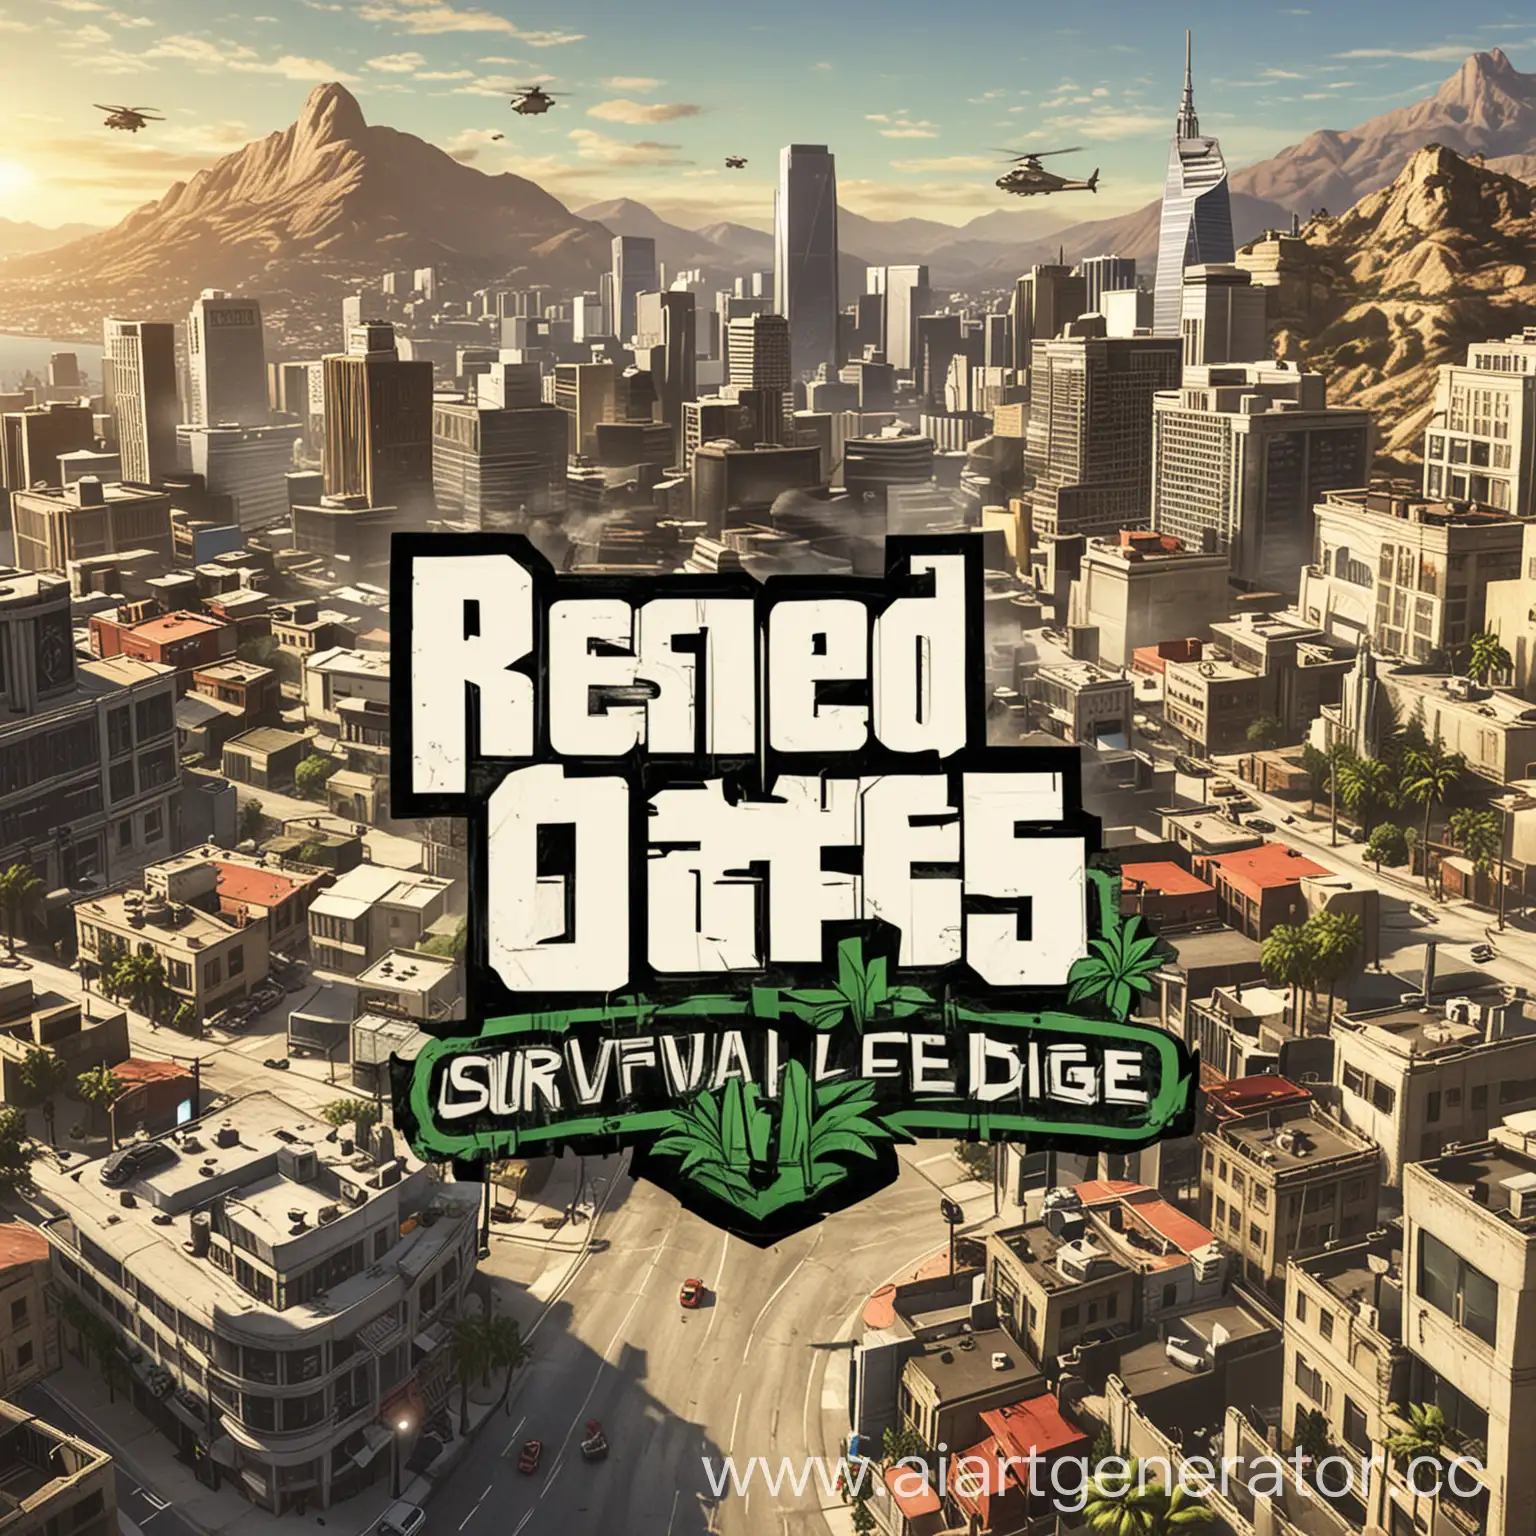 A logo for the game server in GTA 5 under the name Rescued City: Survival on the Edge is needed.